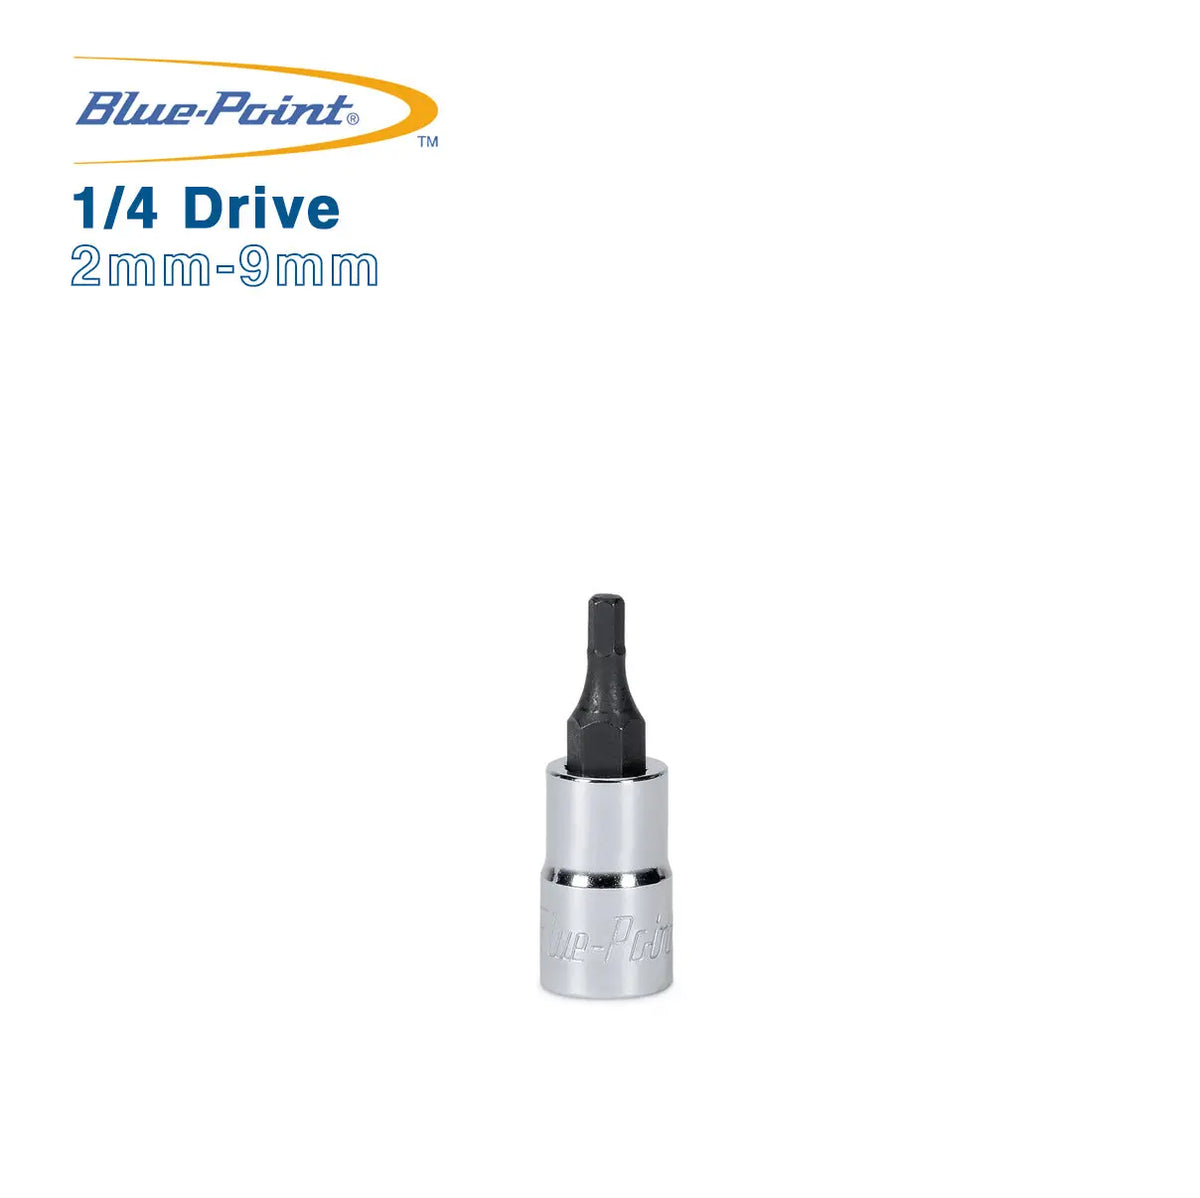 Blue Point 1/4 Drive Hex Sockets 2mm-9mm BluePoint